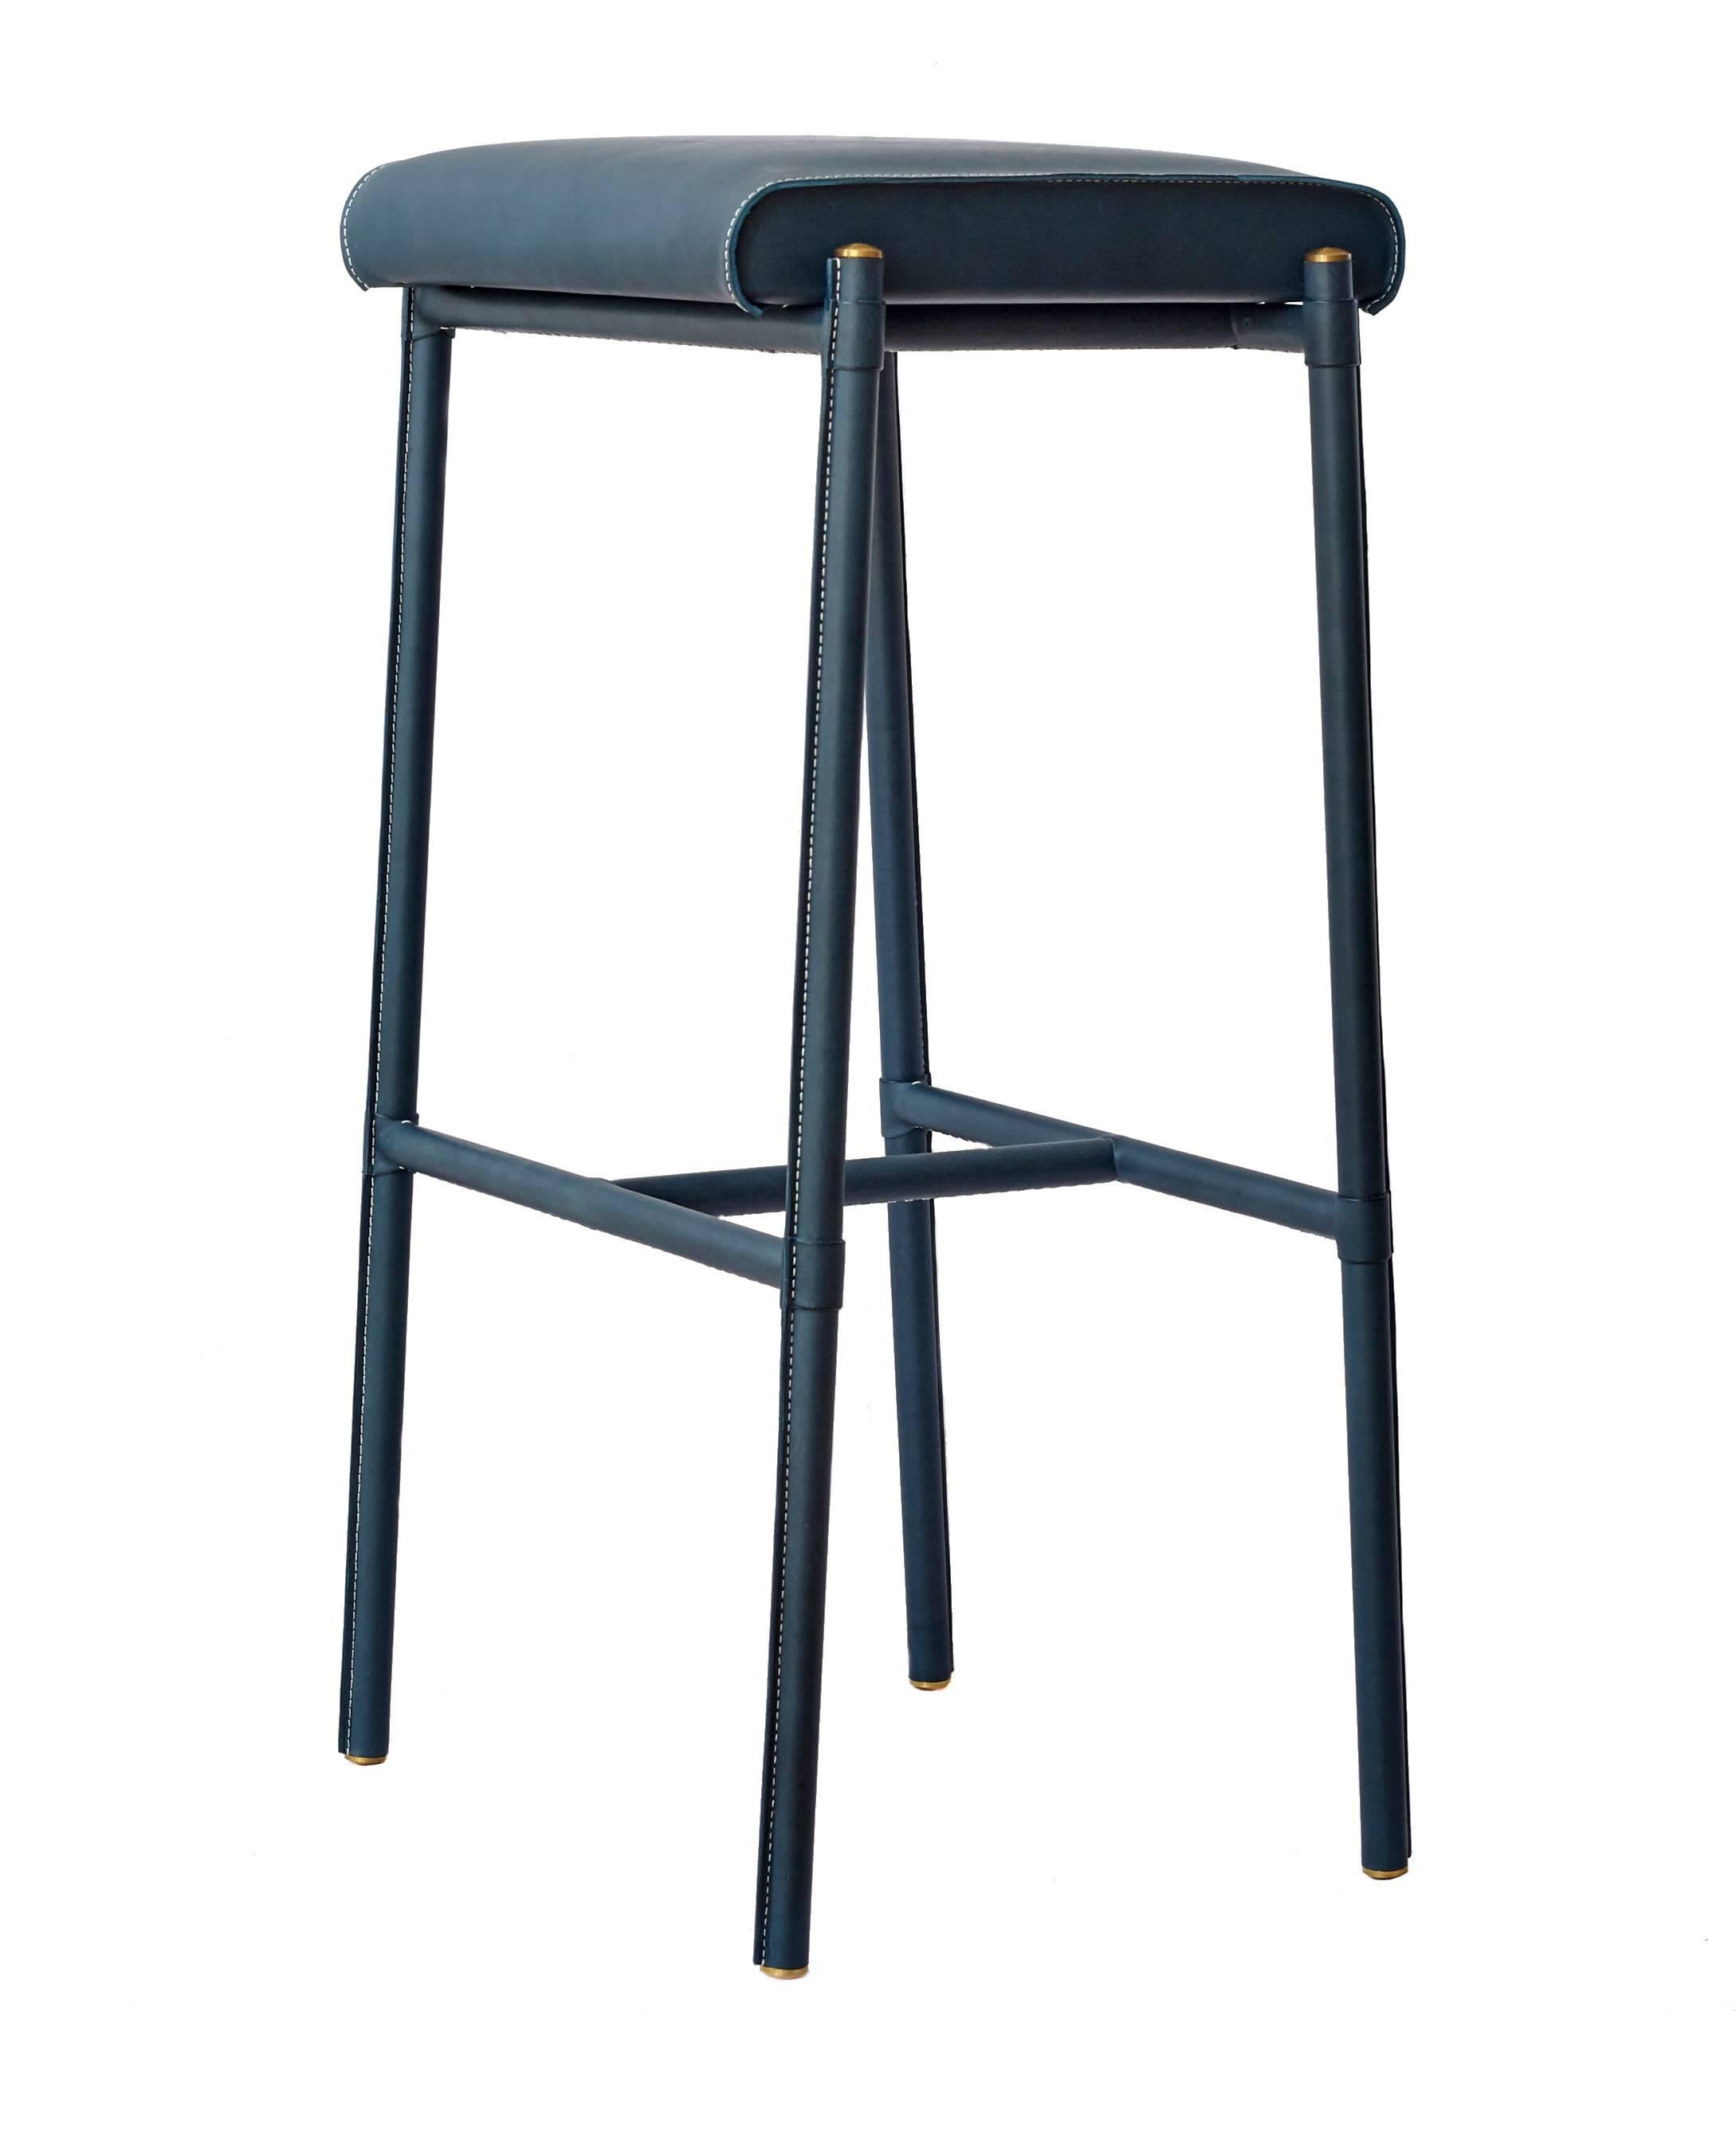 Art Deco 'Jacqueline' Bar Stool, Leather-Wrapped and Hand-Stitched, with Upholstered seat For Sale